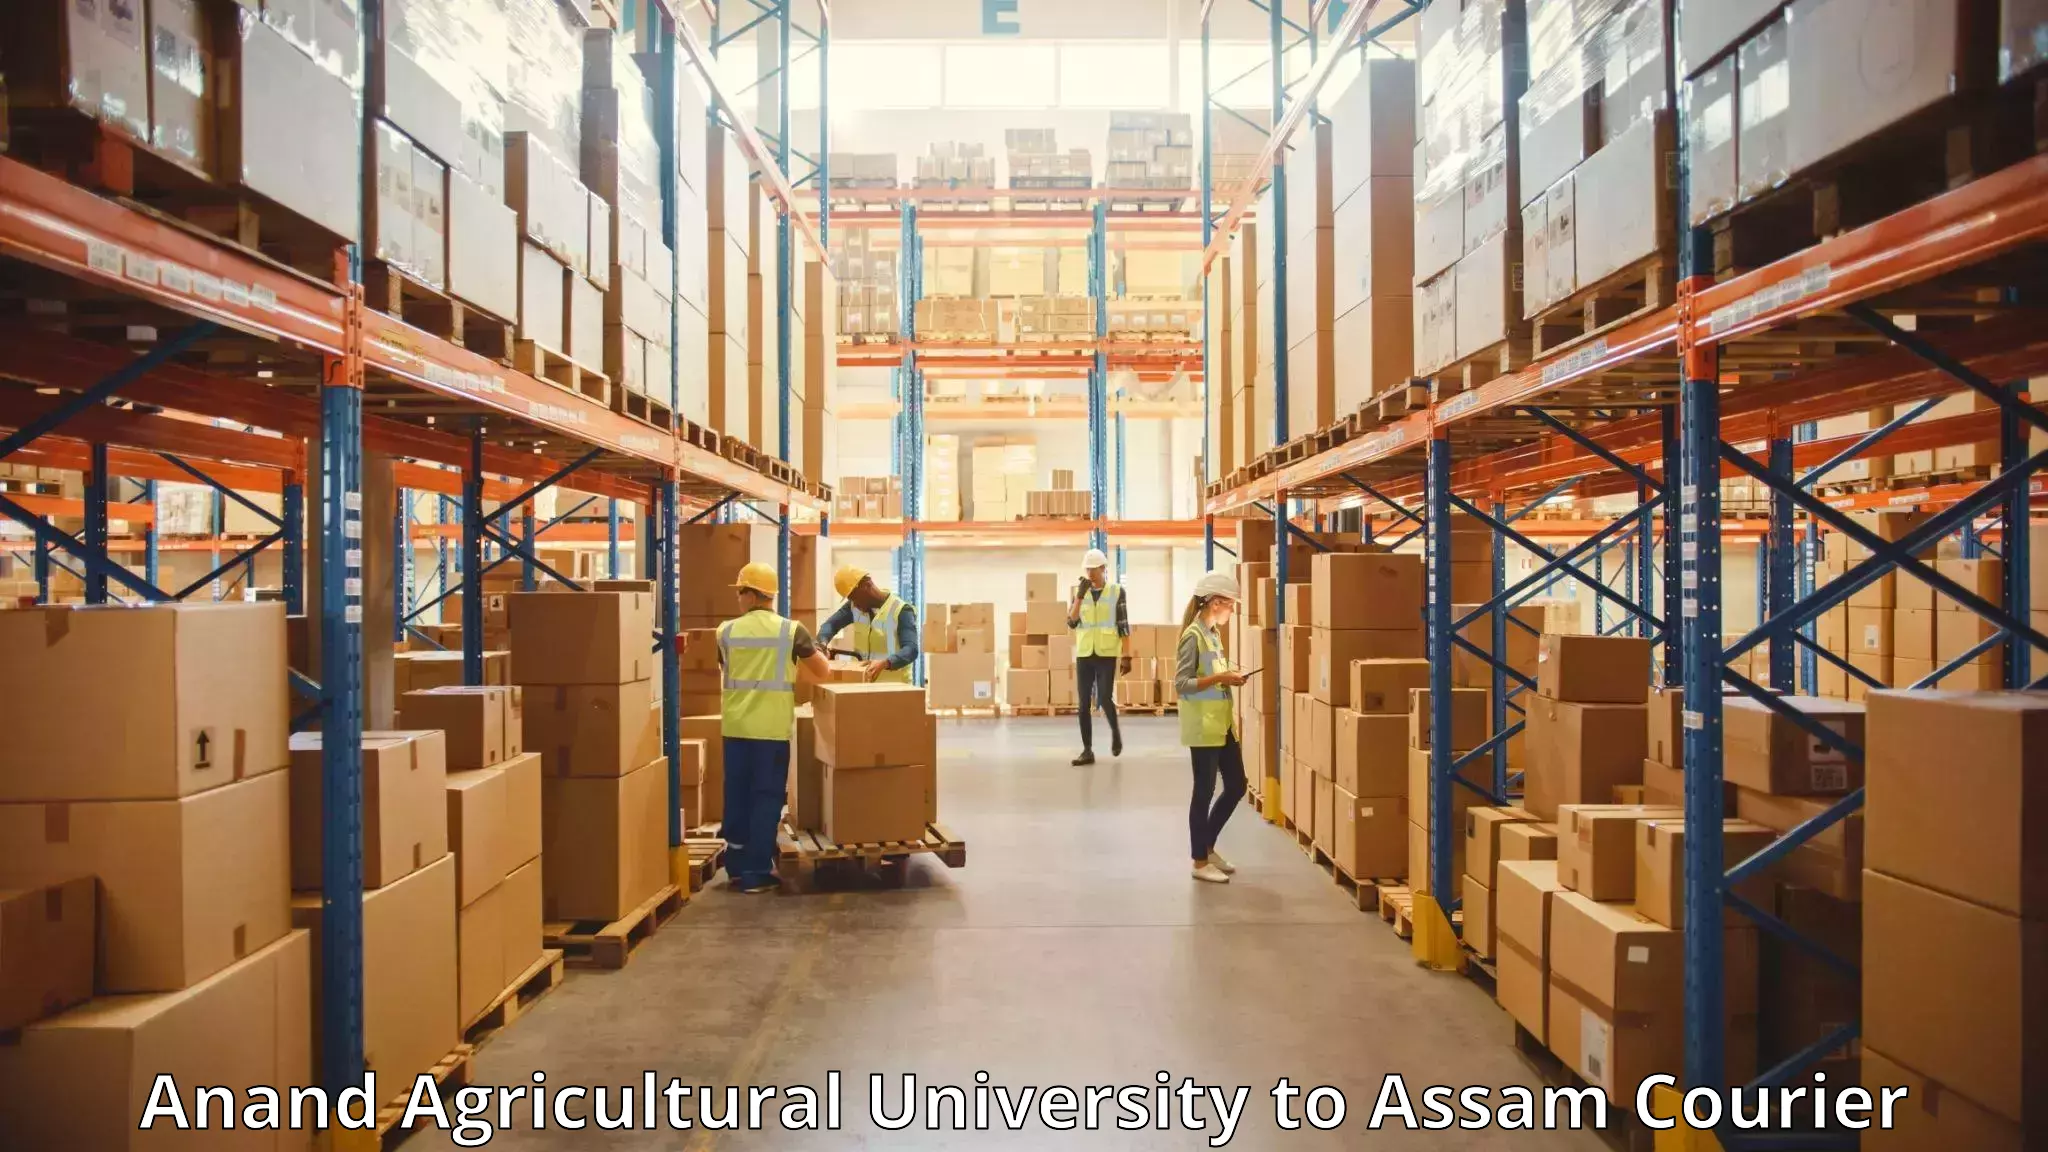 Hassle-free luggage shipping Anand Agricultural University to Lala Assam